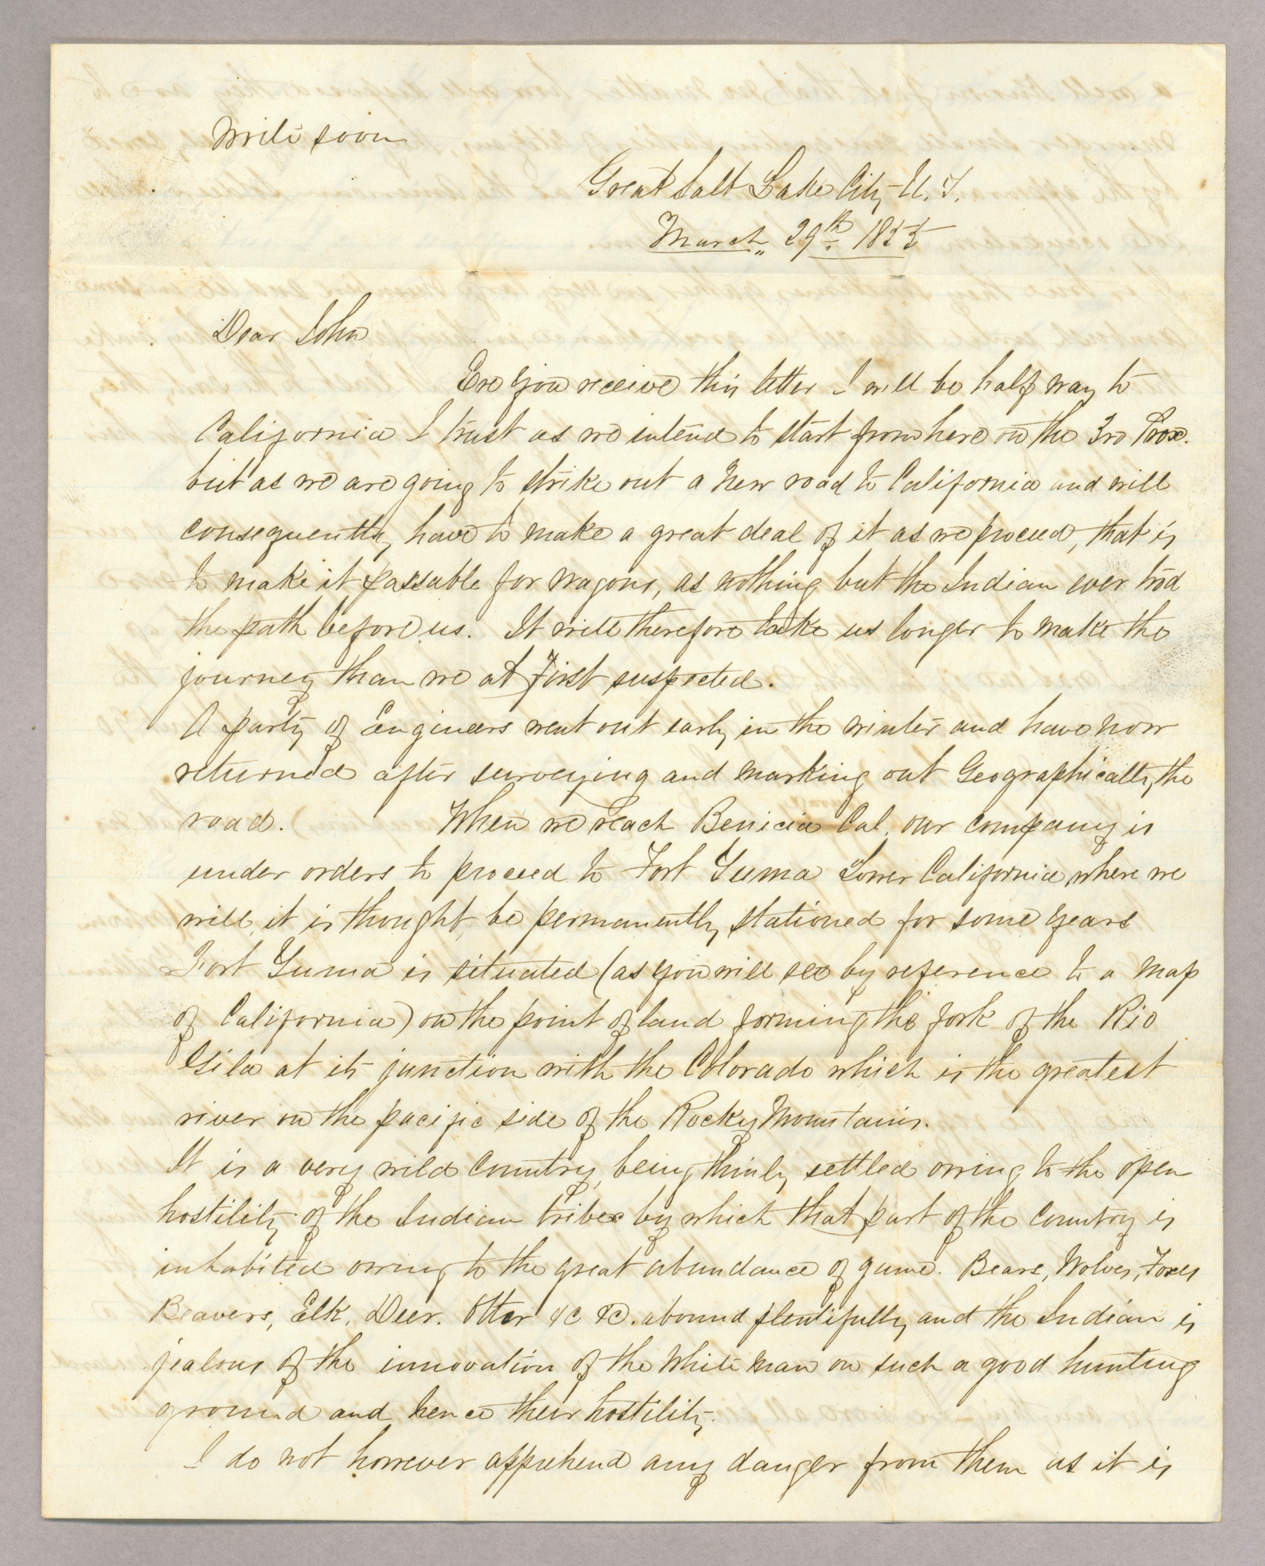 Letter. Tho[ma]s L[owry] Young, Great Salt Lake City, Utah Territory, to "Dear John" [John E. Brownlee], n. p., Page 1